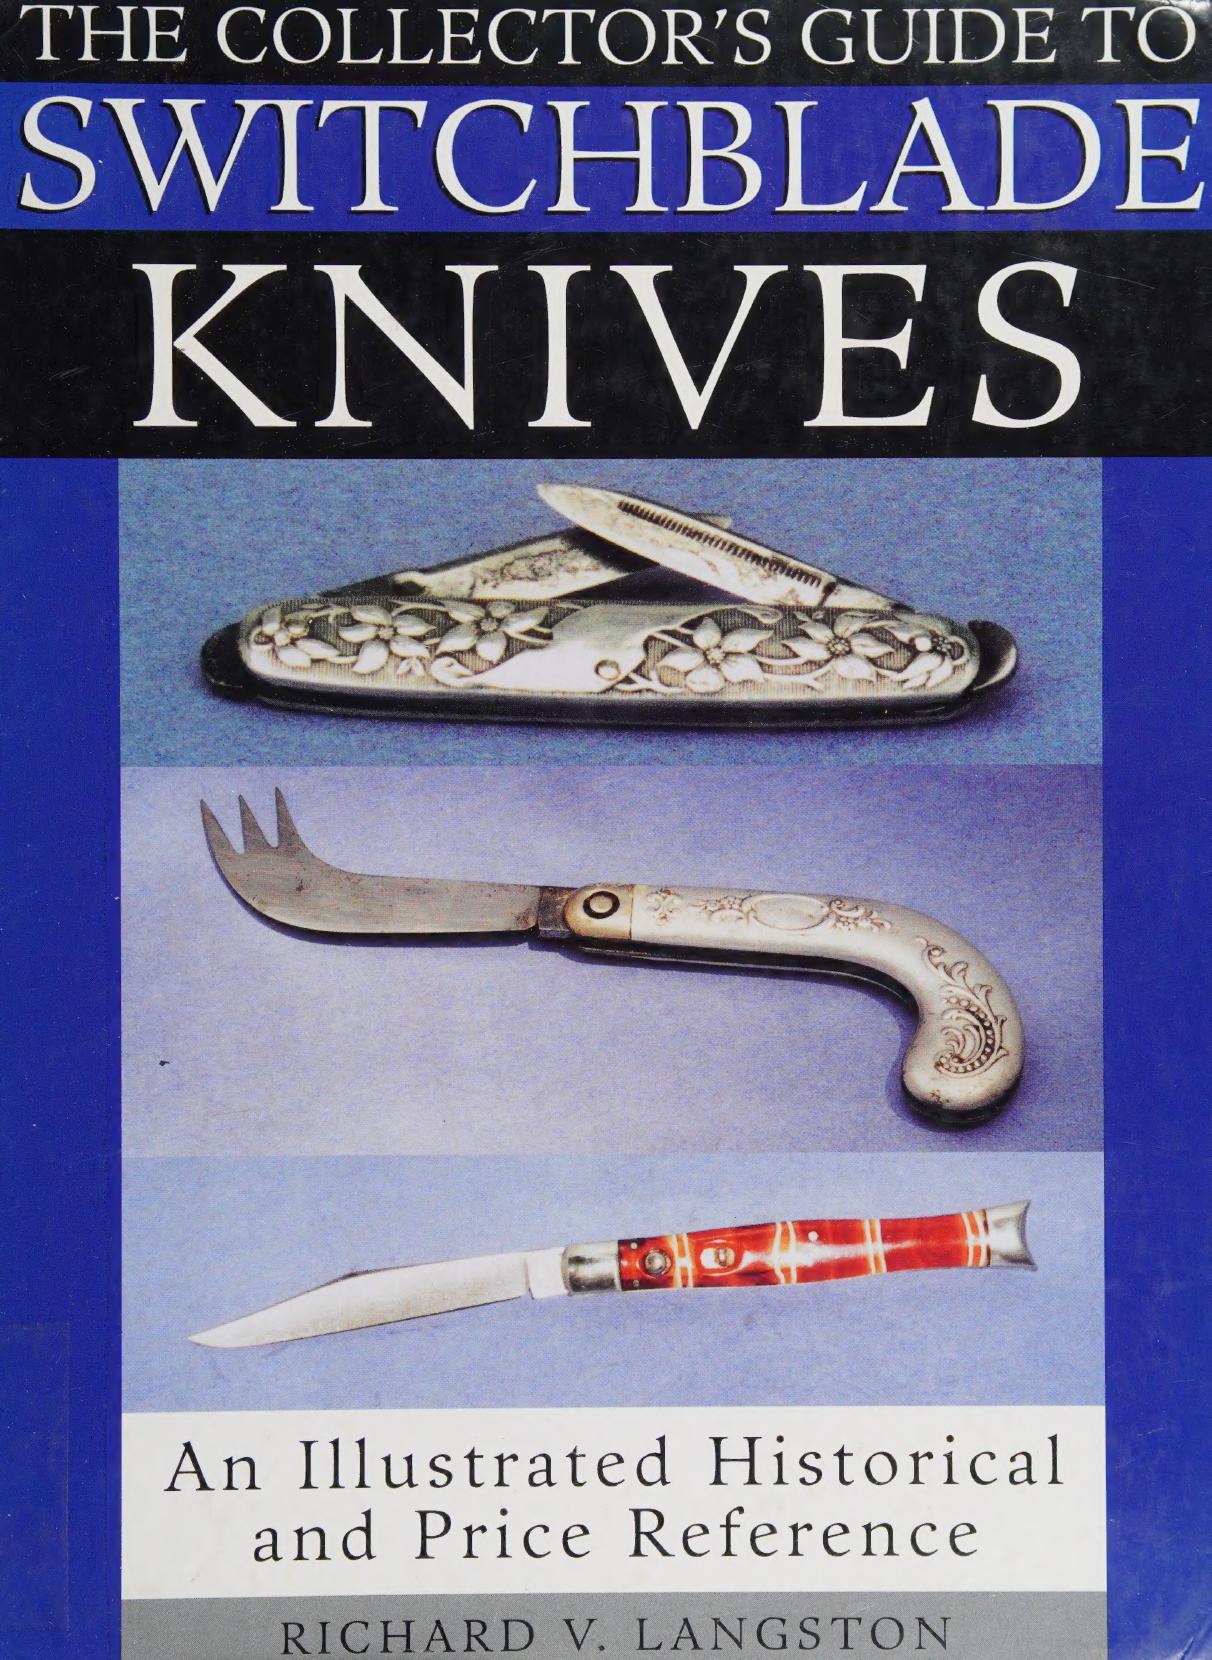 The Collector's Guide to Switchblade Knives: An Illustrated Historical and Price Reference by Richard V. Langston